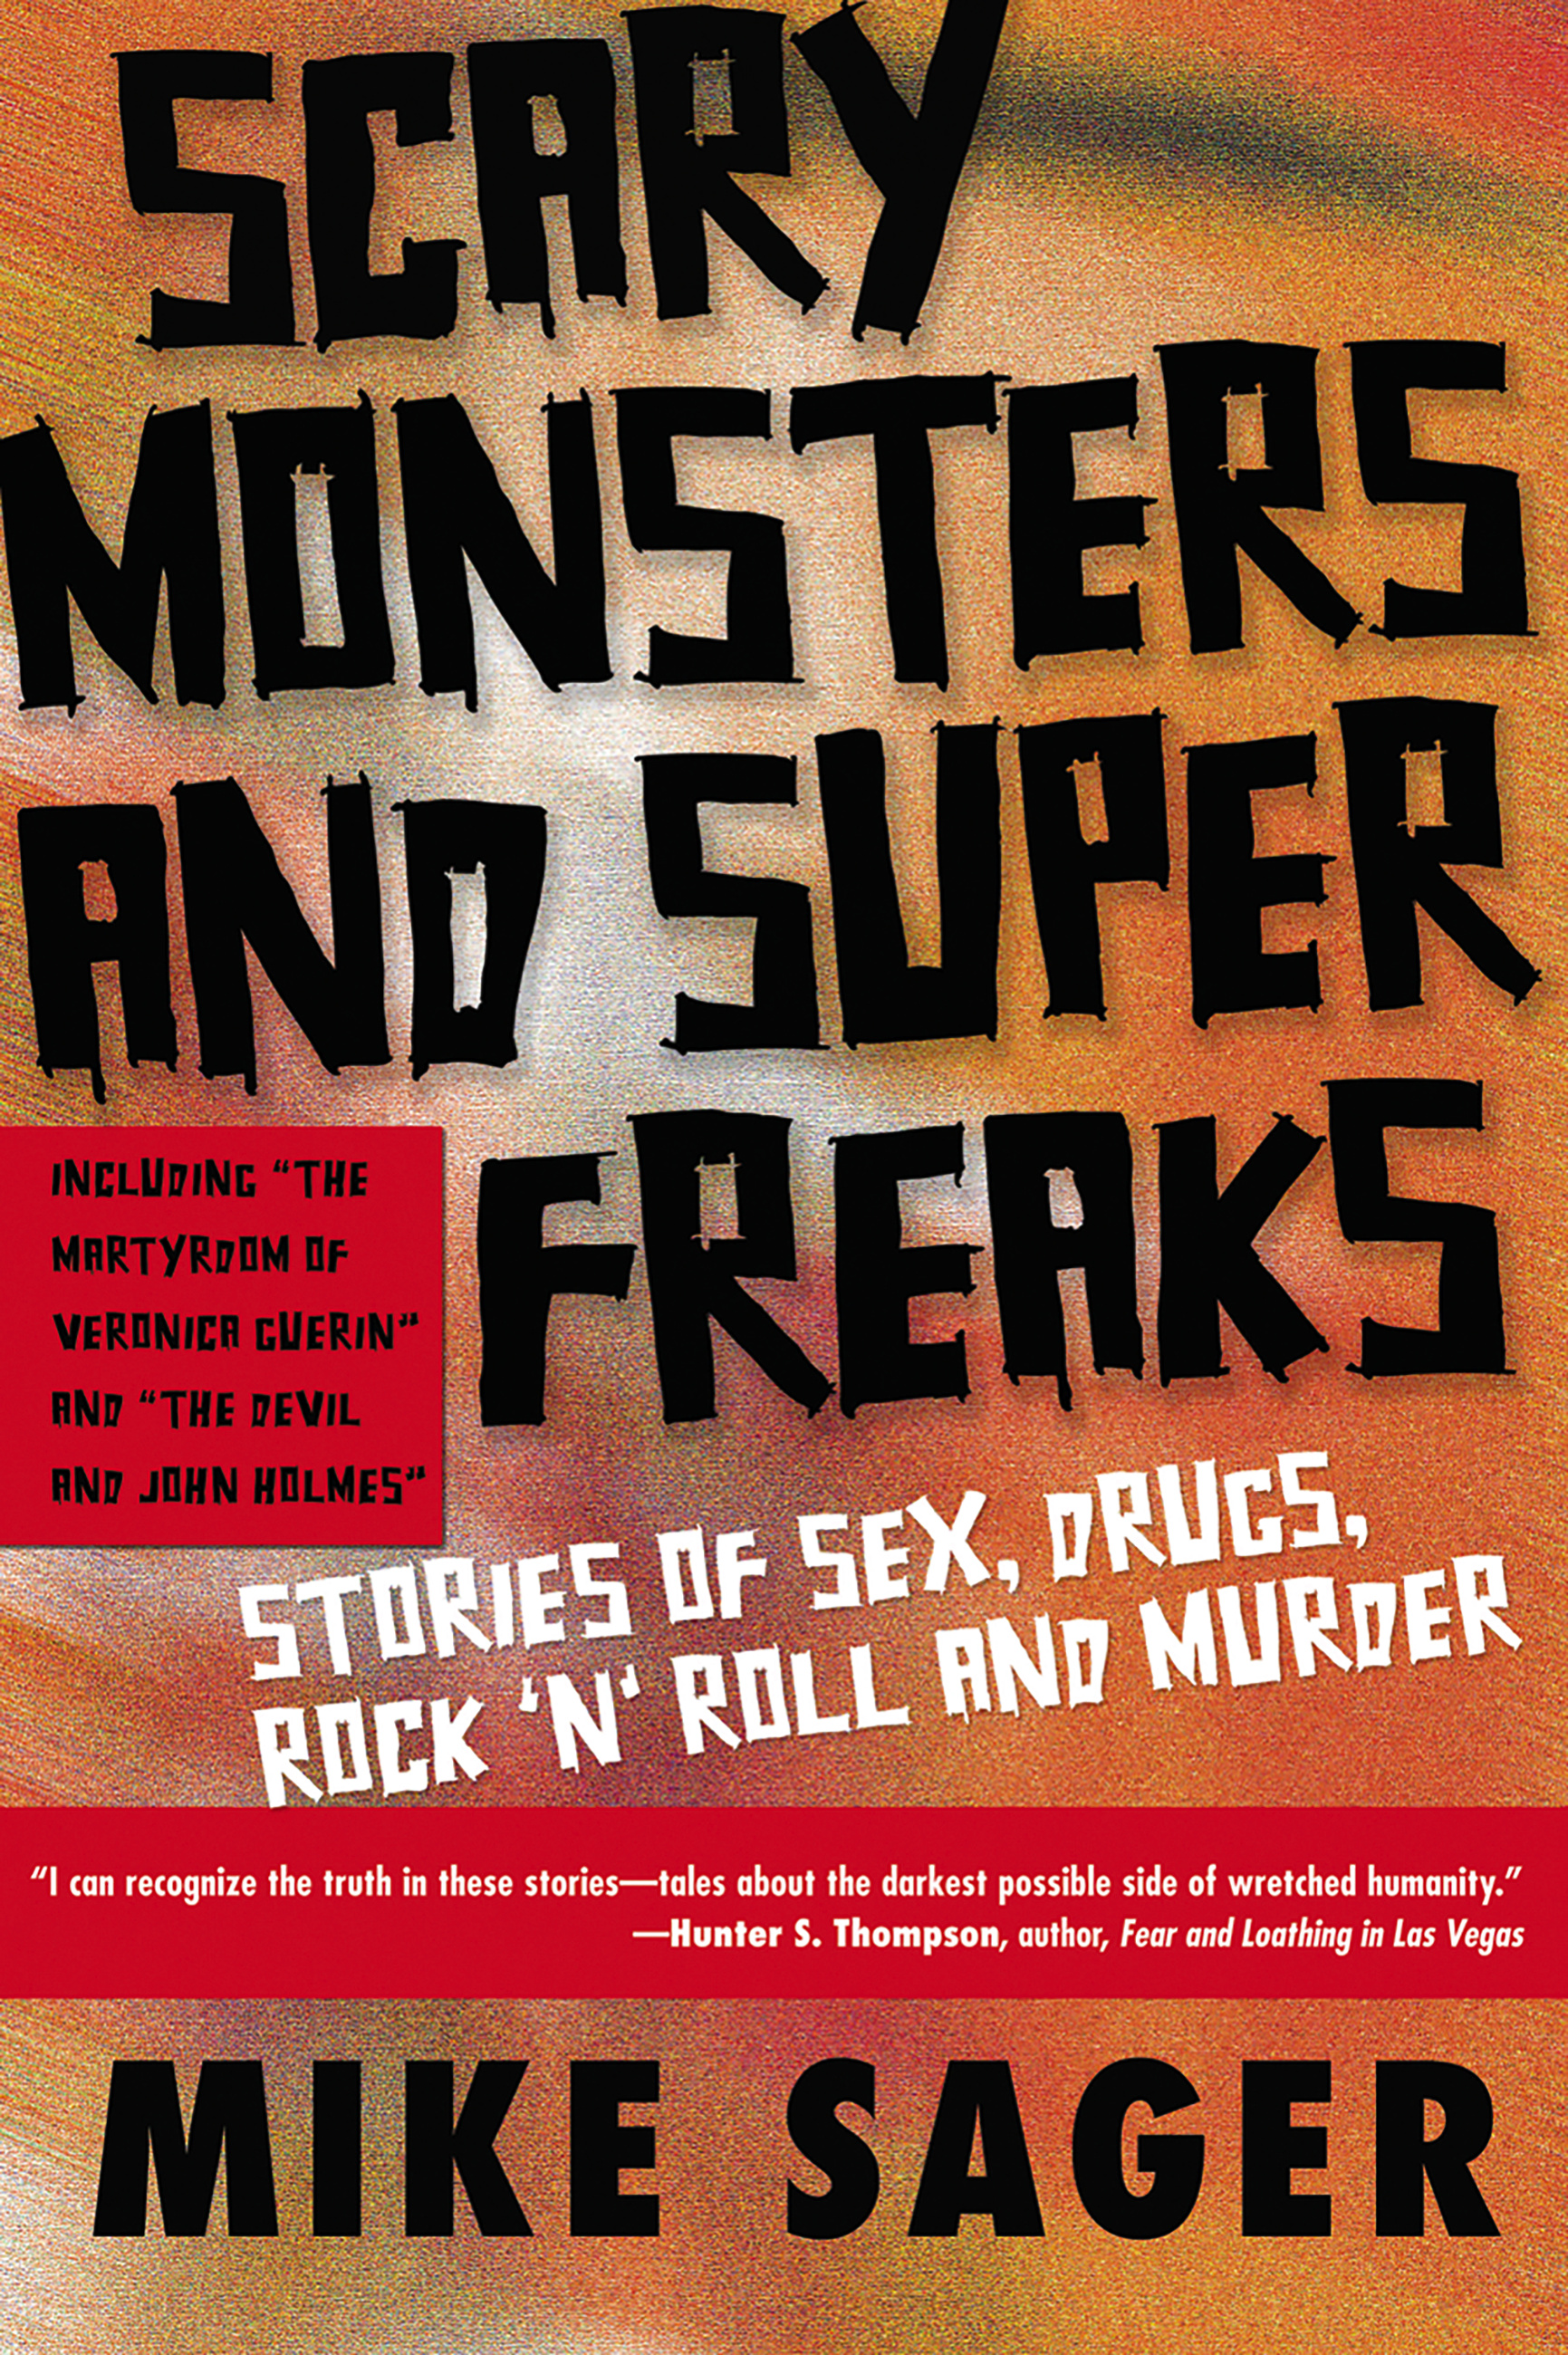 Scary Monsters and Super Freaks by Mike Sager | Da Capo Press